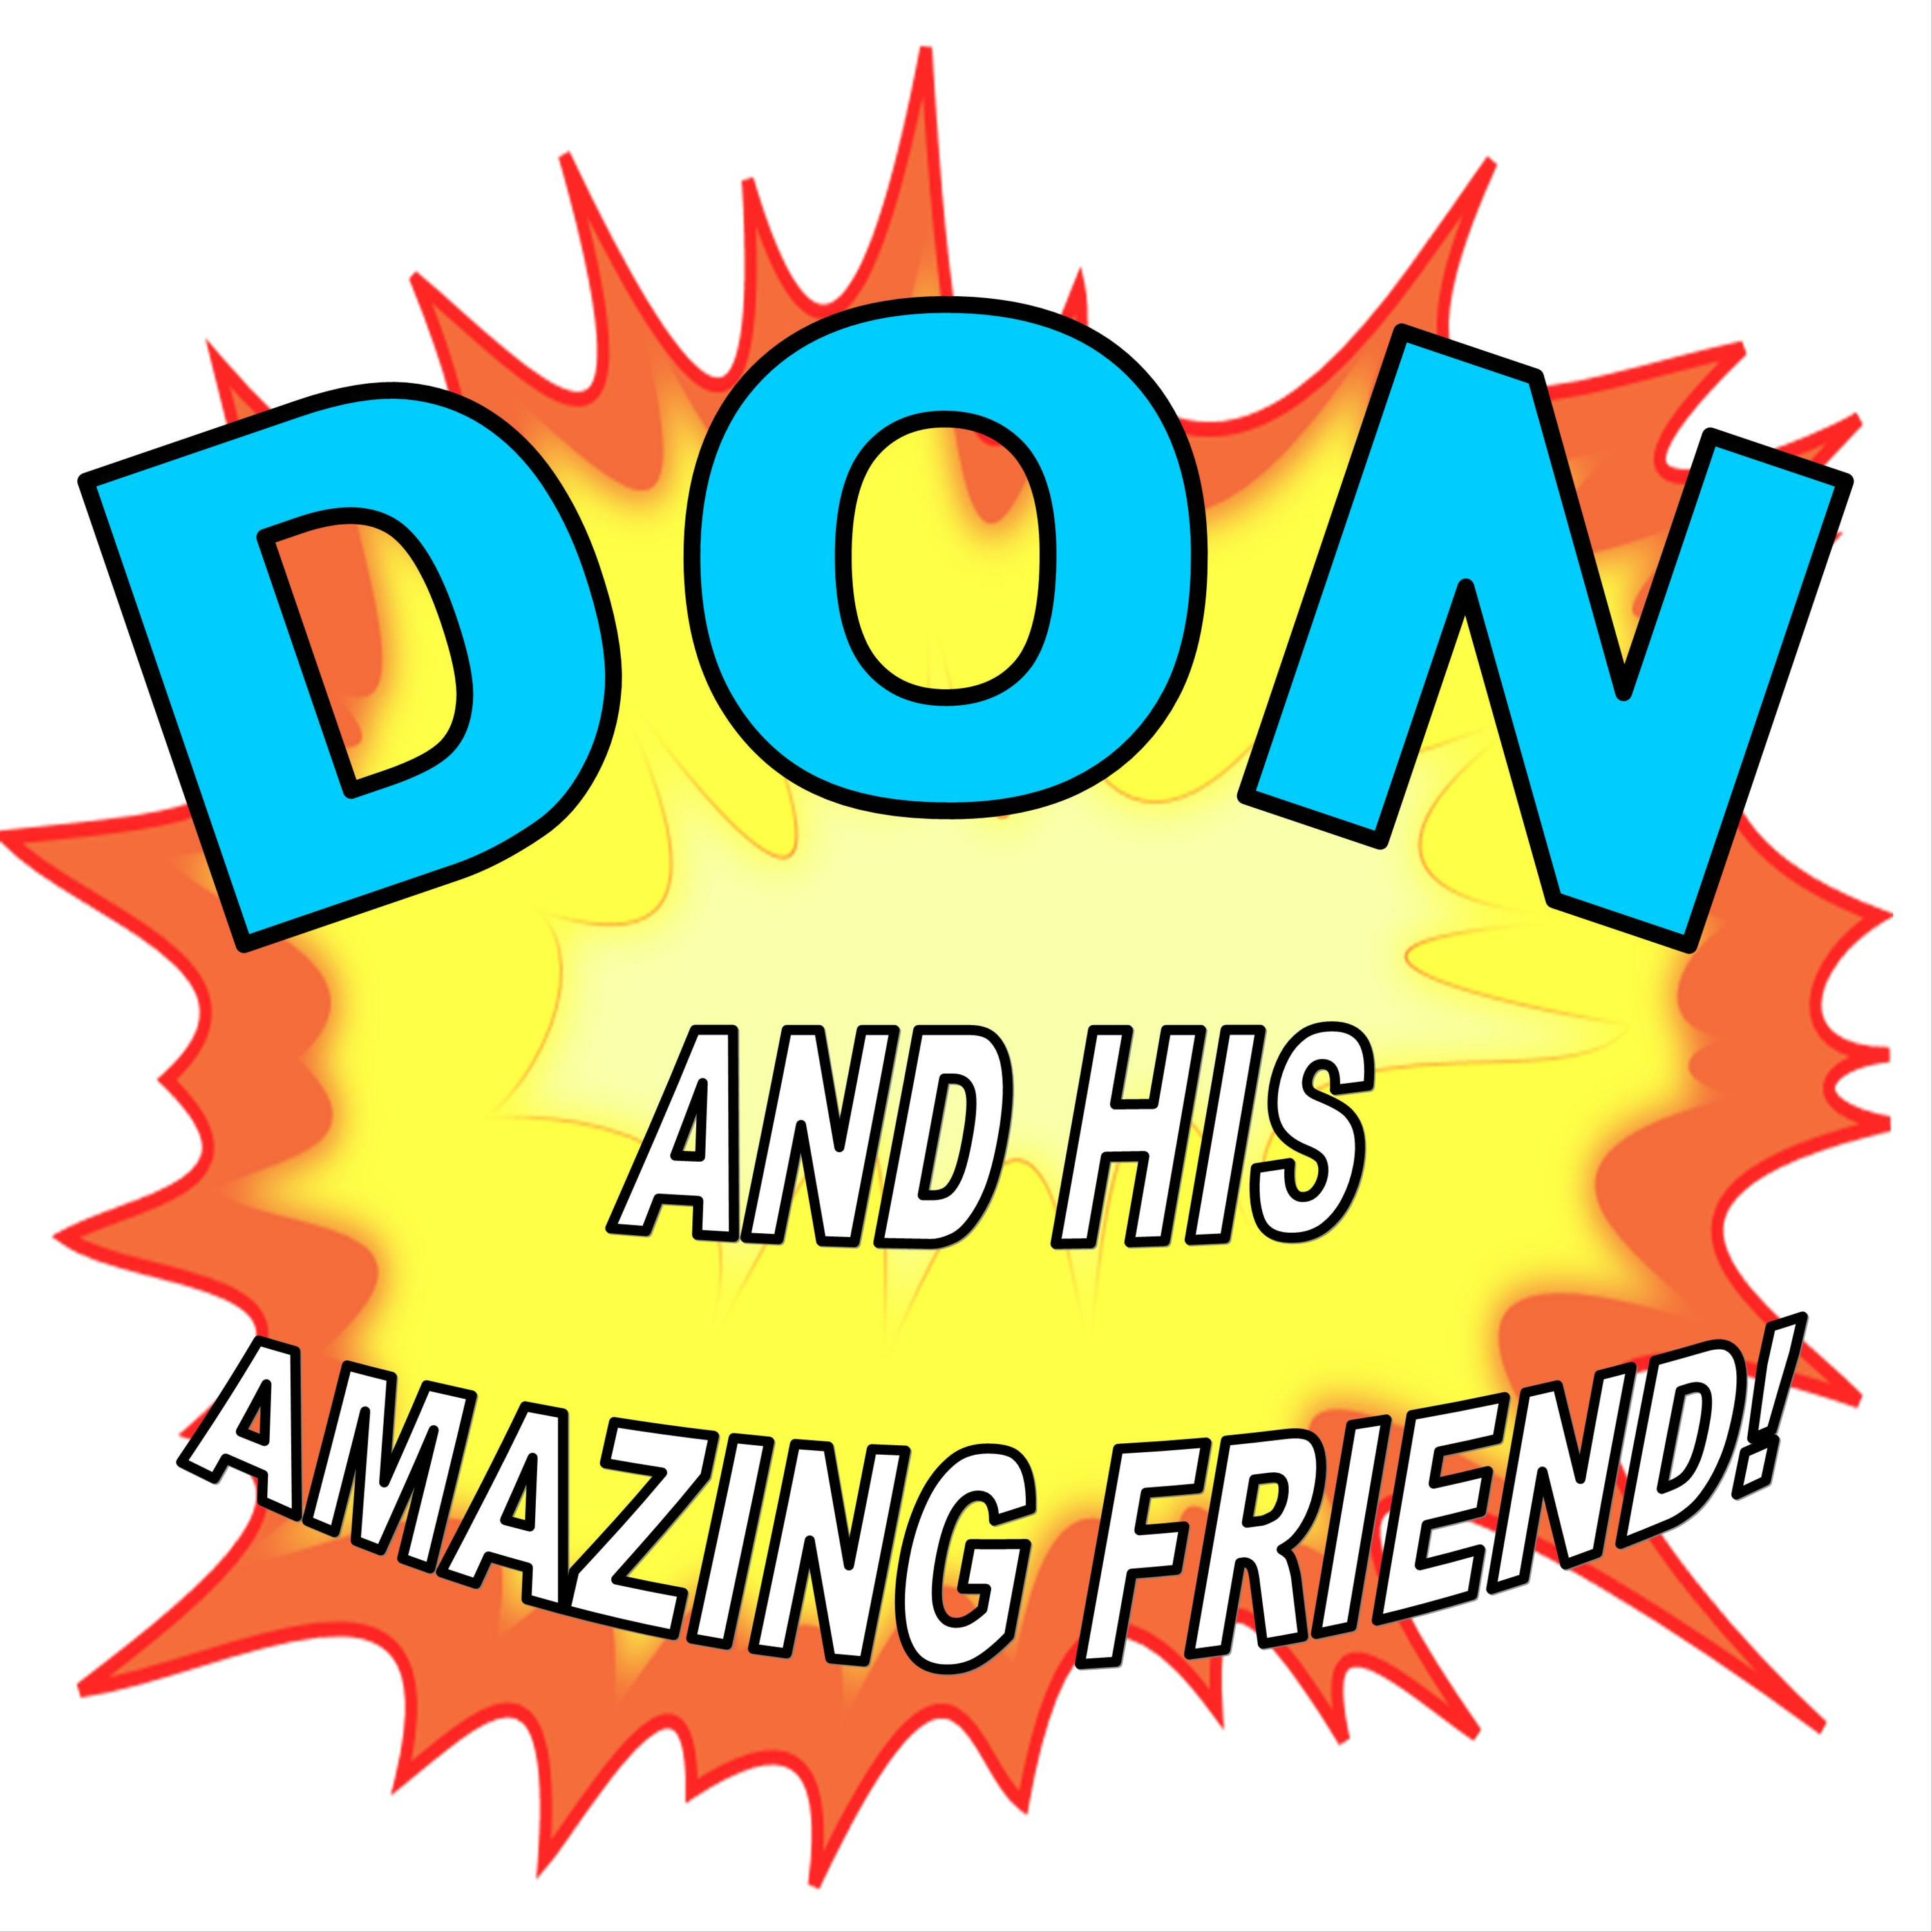 DON and his AMAZING FRIEND!